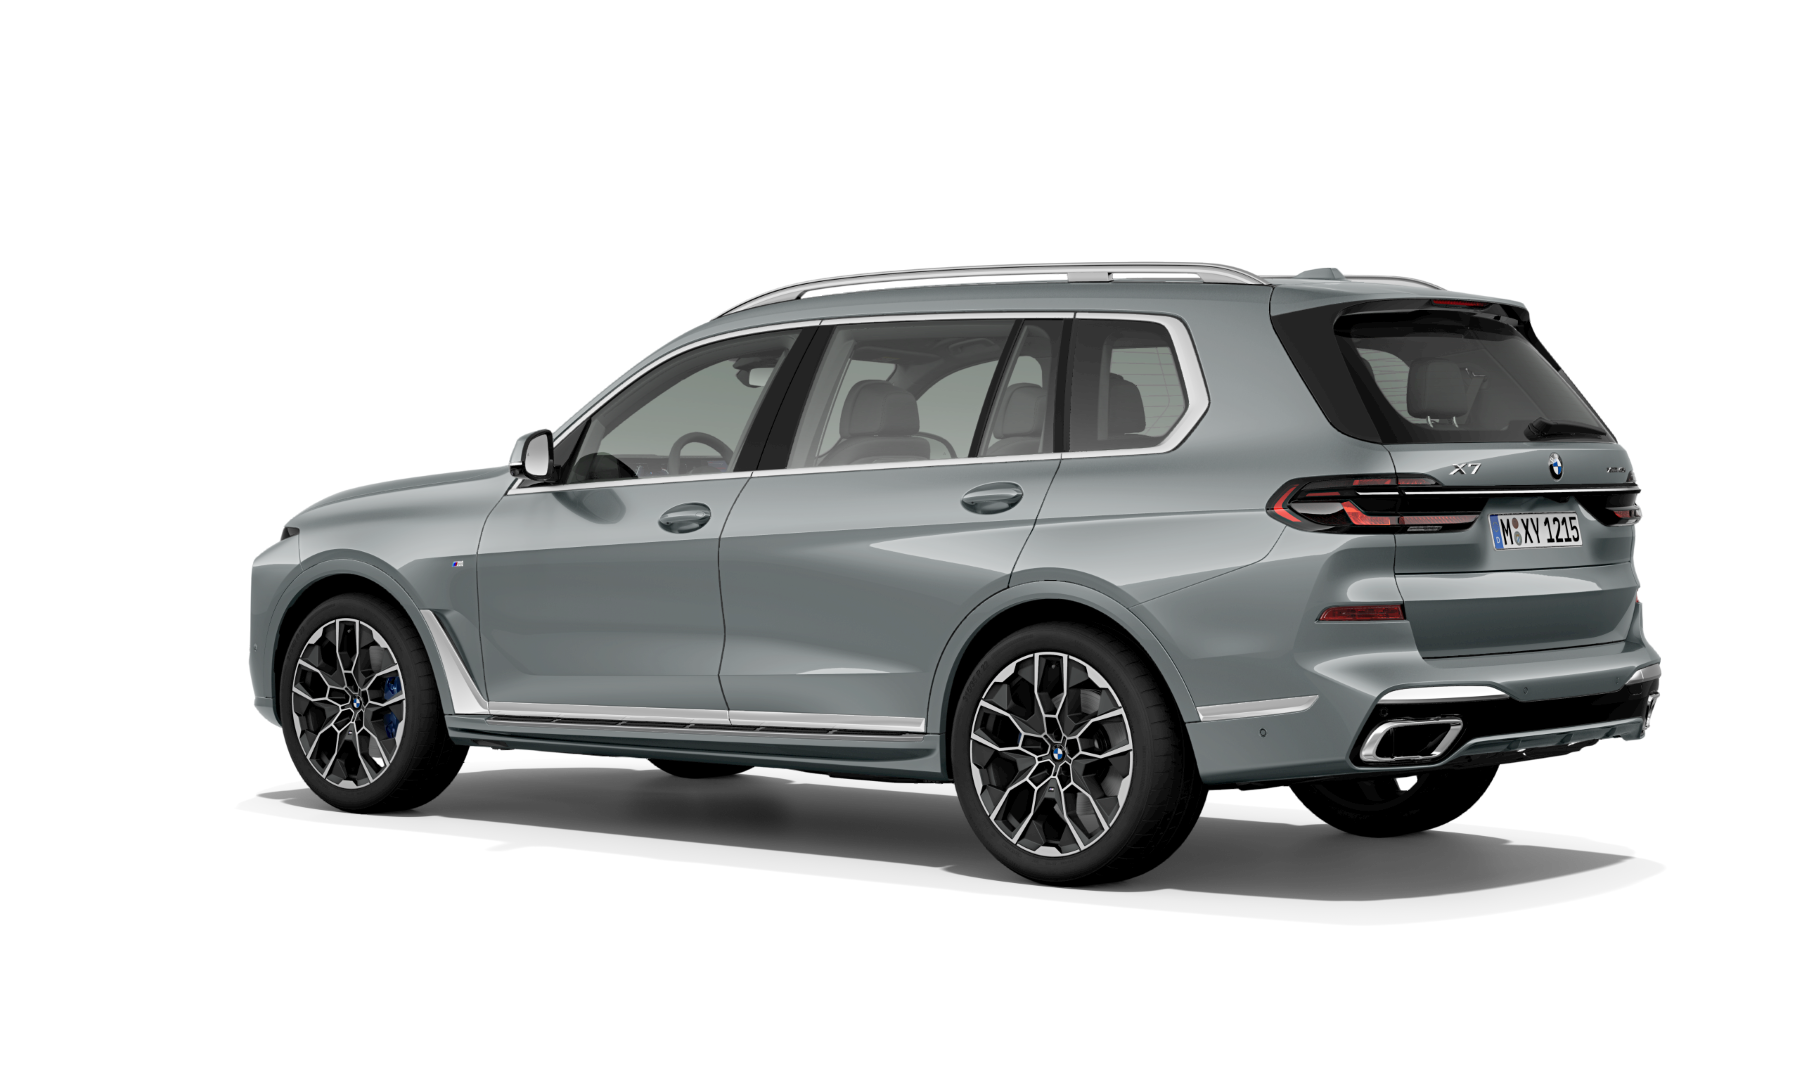 BMW X7 xDrive40i M Sport CKD is here for RM719k